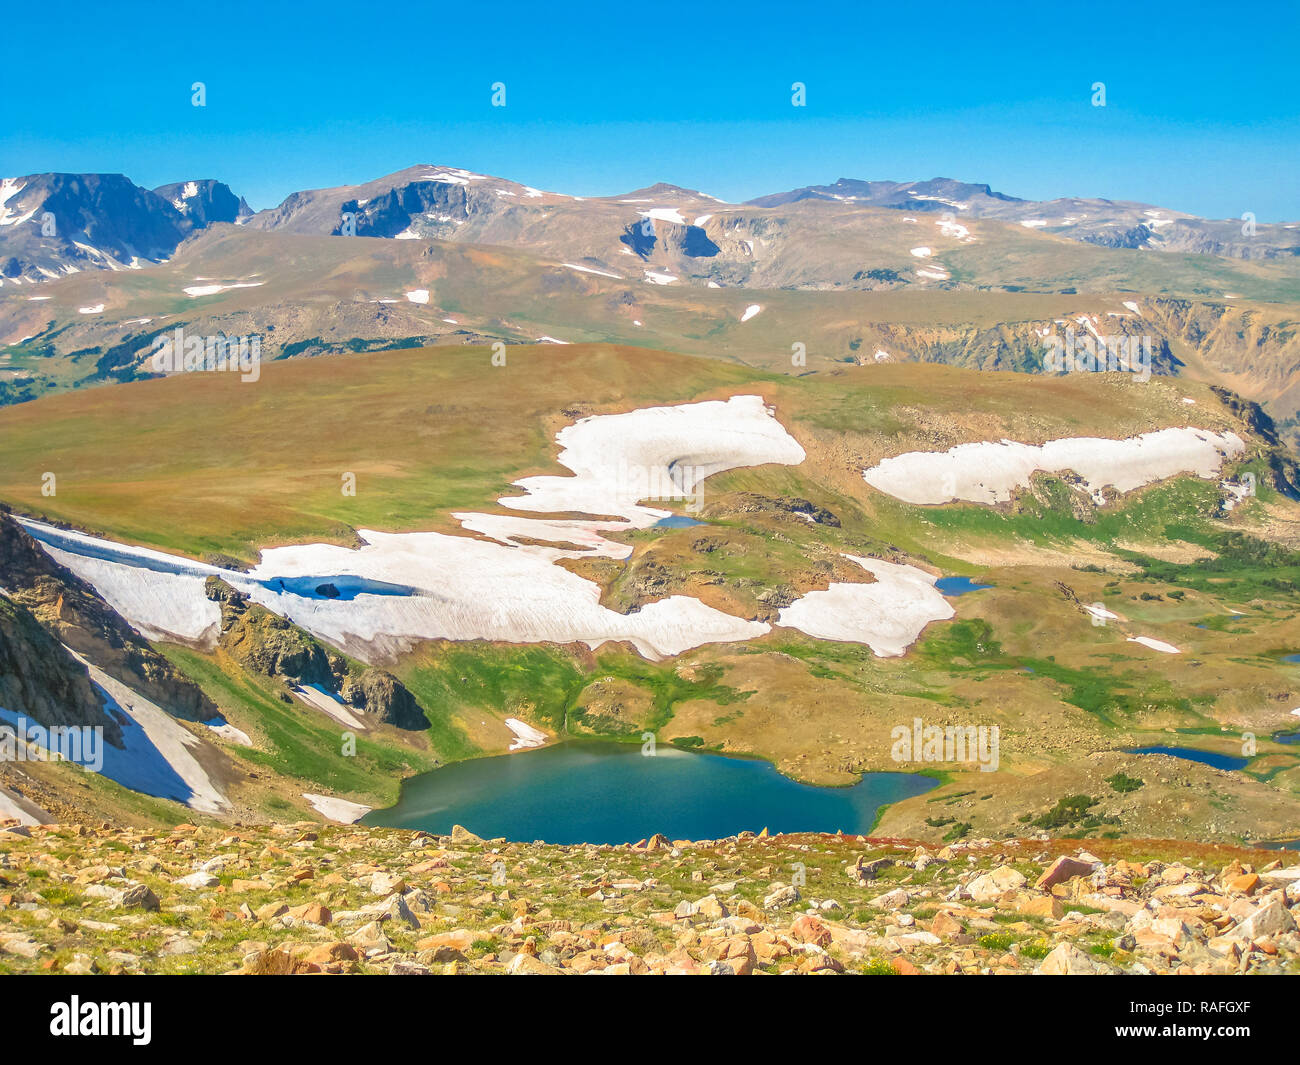 Aerial Alpine lake along Beartooth Highway, Northeast gateway of Yellowstone National Park. Beartooth Highway, the most beautiful drive in America, is a section of Route 212 in Montana and Wyoming. Stock Photo